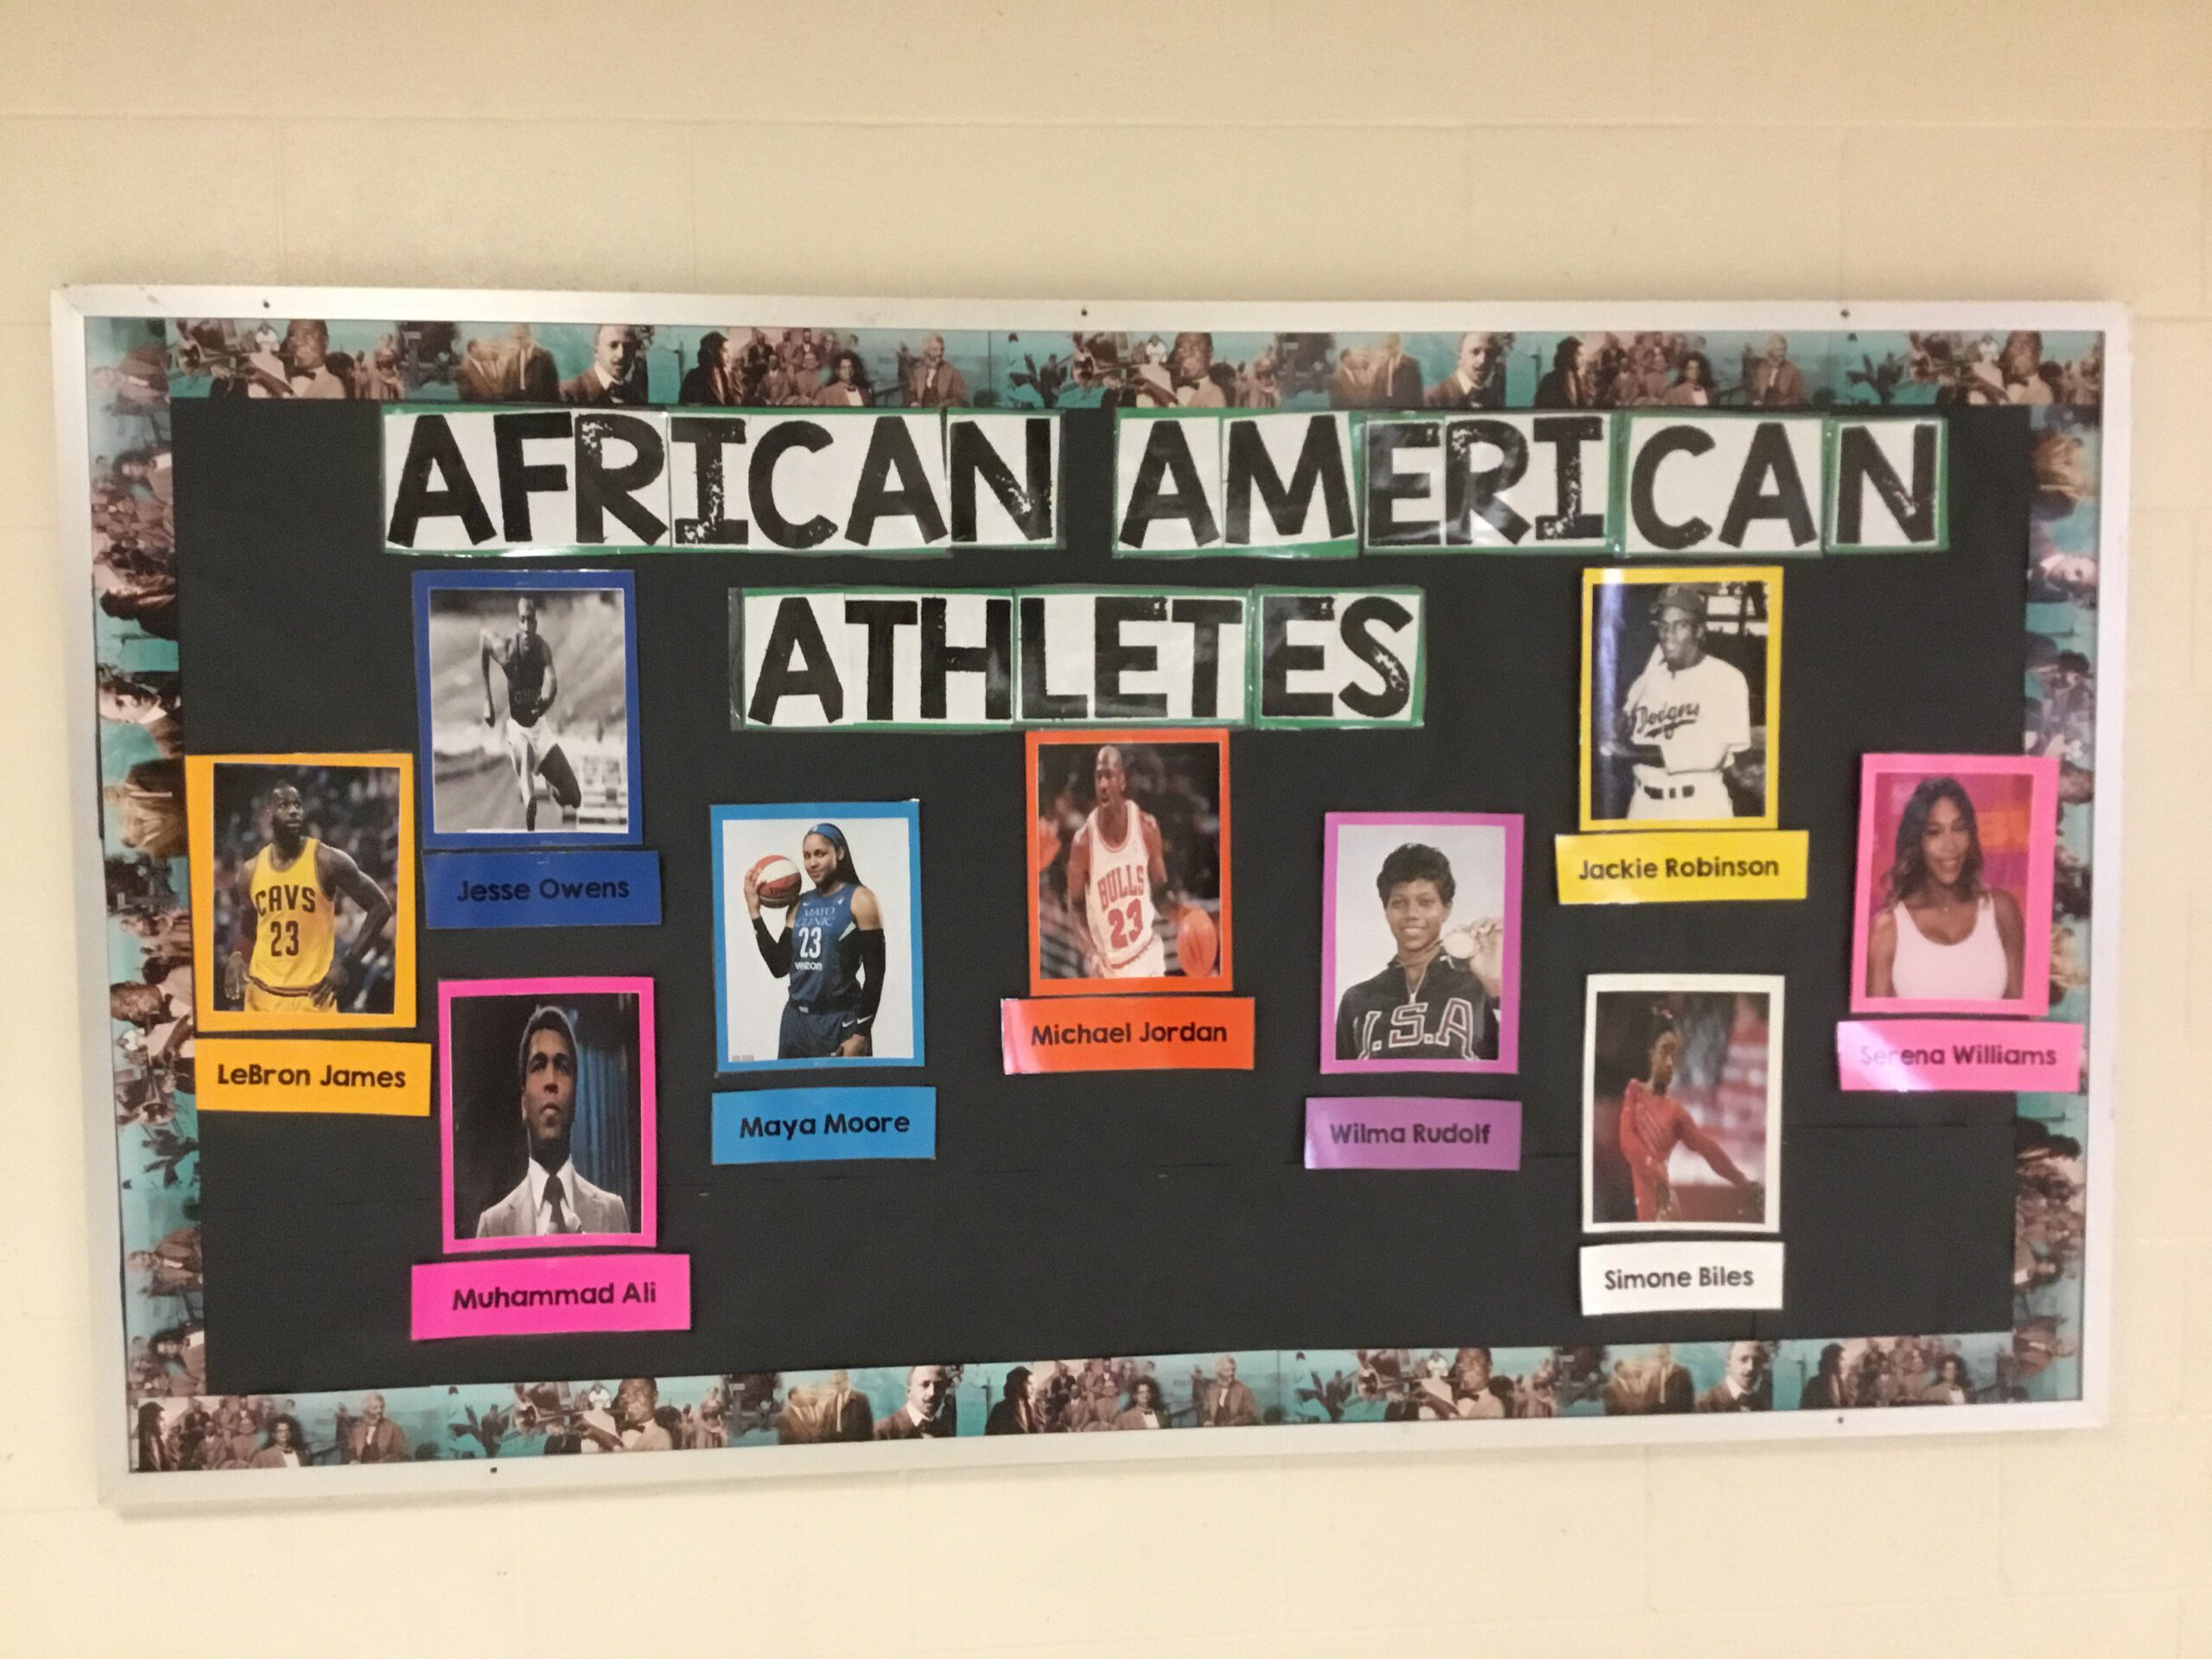 A black background says African American Athletes. It has pictures and descriptions of prominent Black athletes.